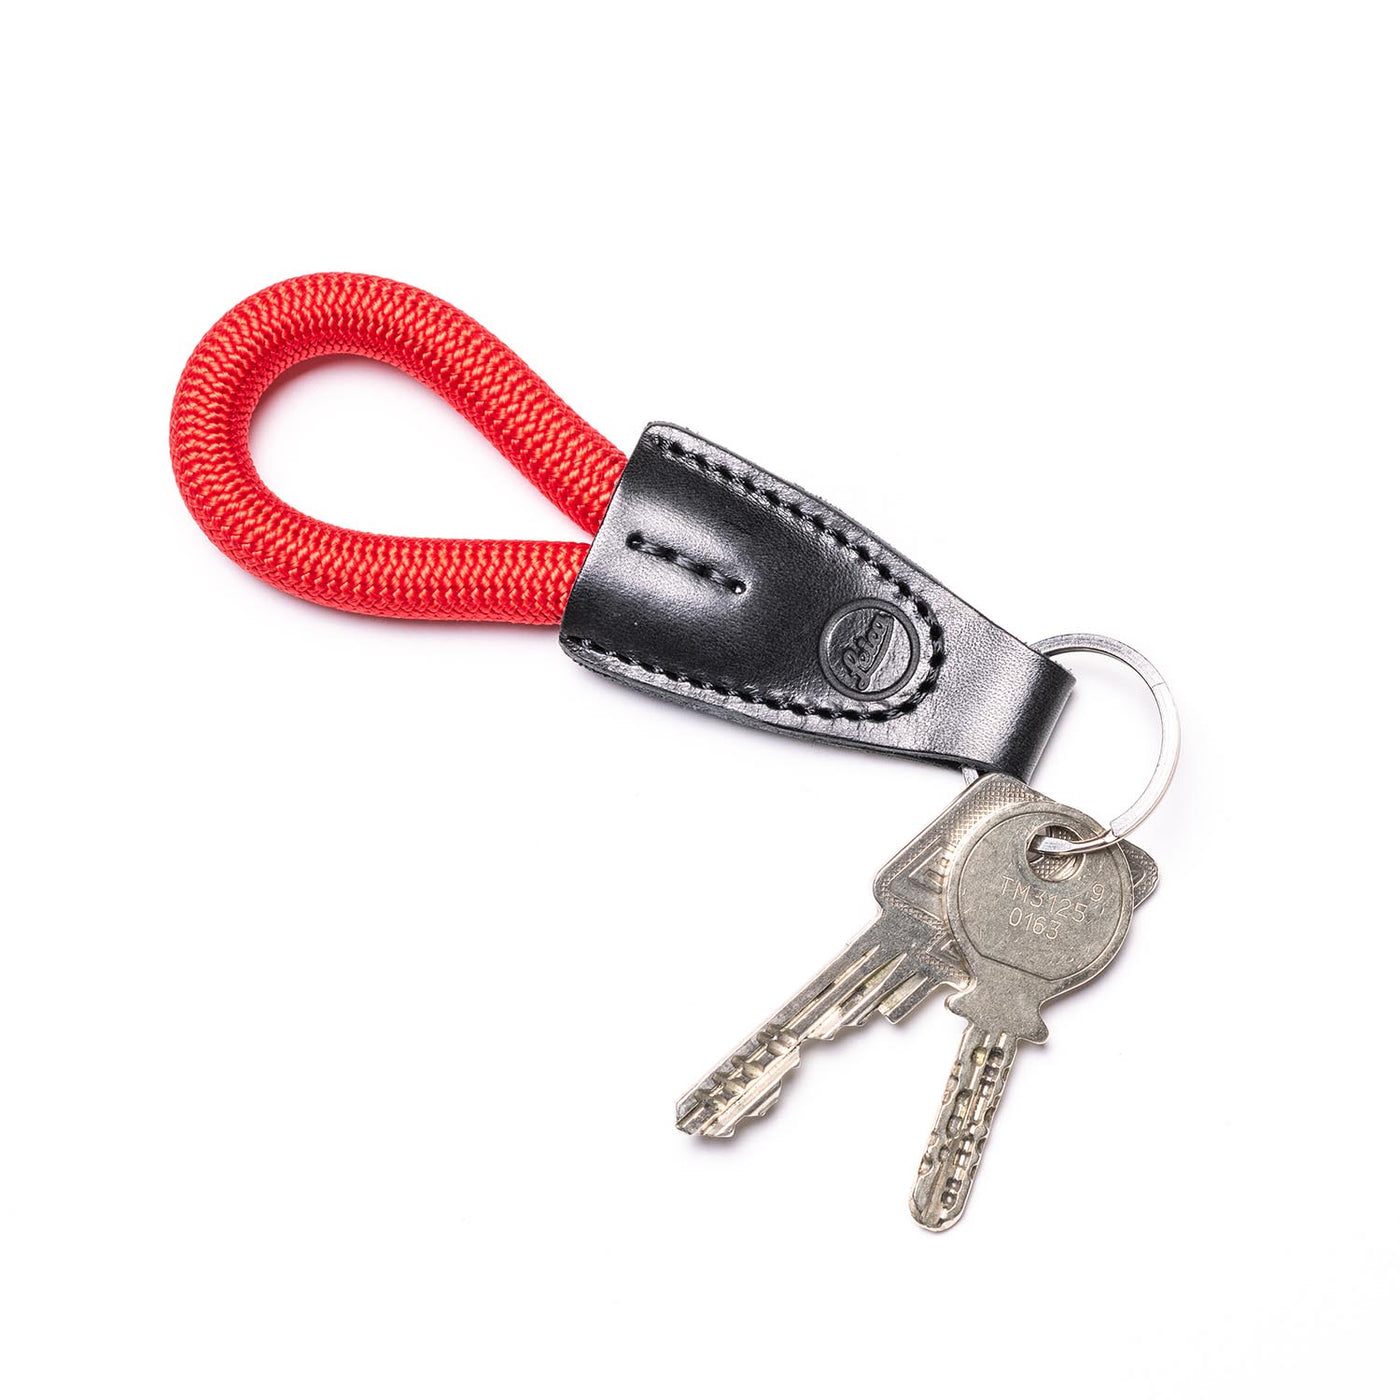 Short loop of rope attached to keys with Leica embossed leather